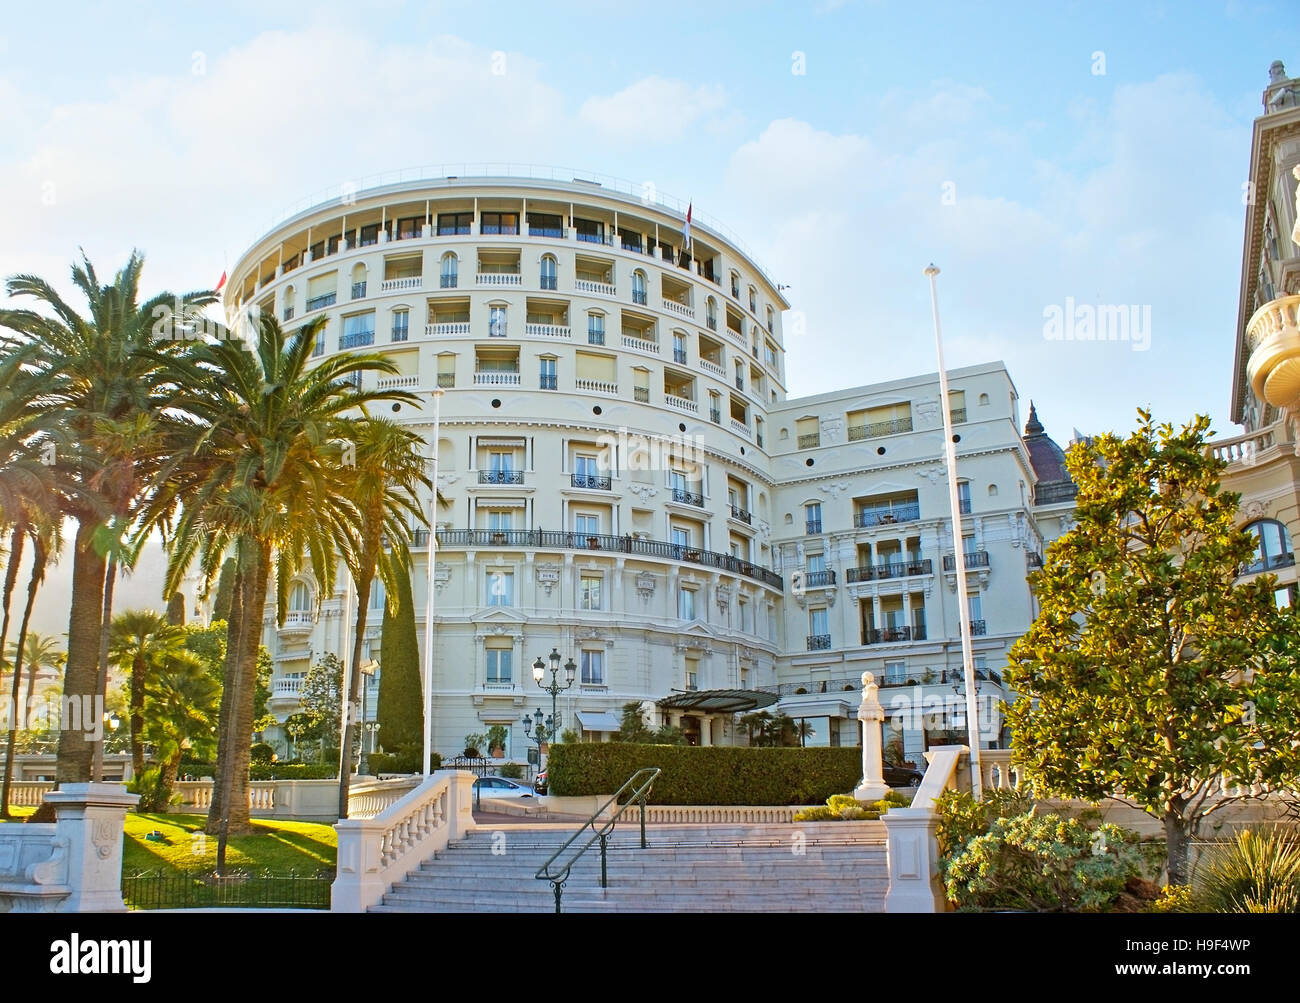 The walk along the shady streets of Monte Carlo with the view on the side facade of luxury Hotel de Paris, Monaco. Stock Photo